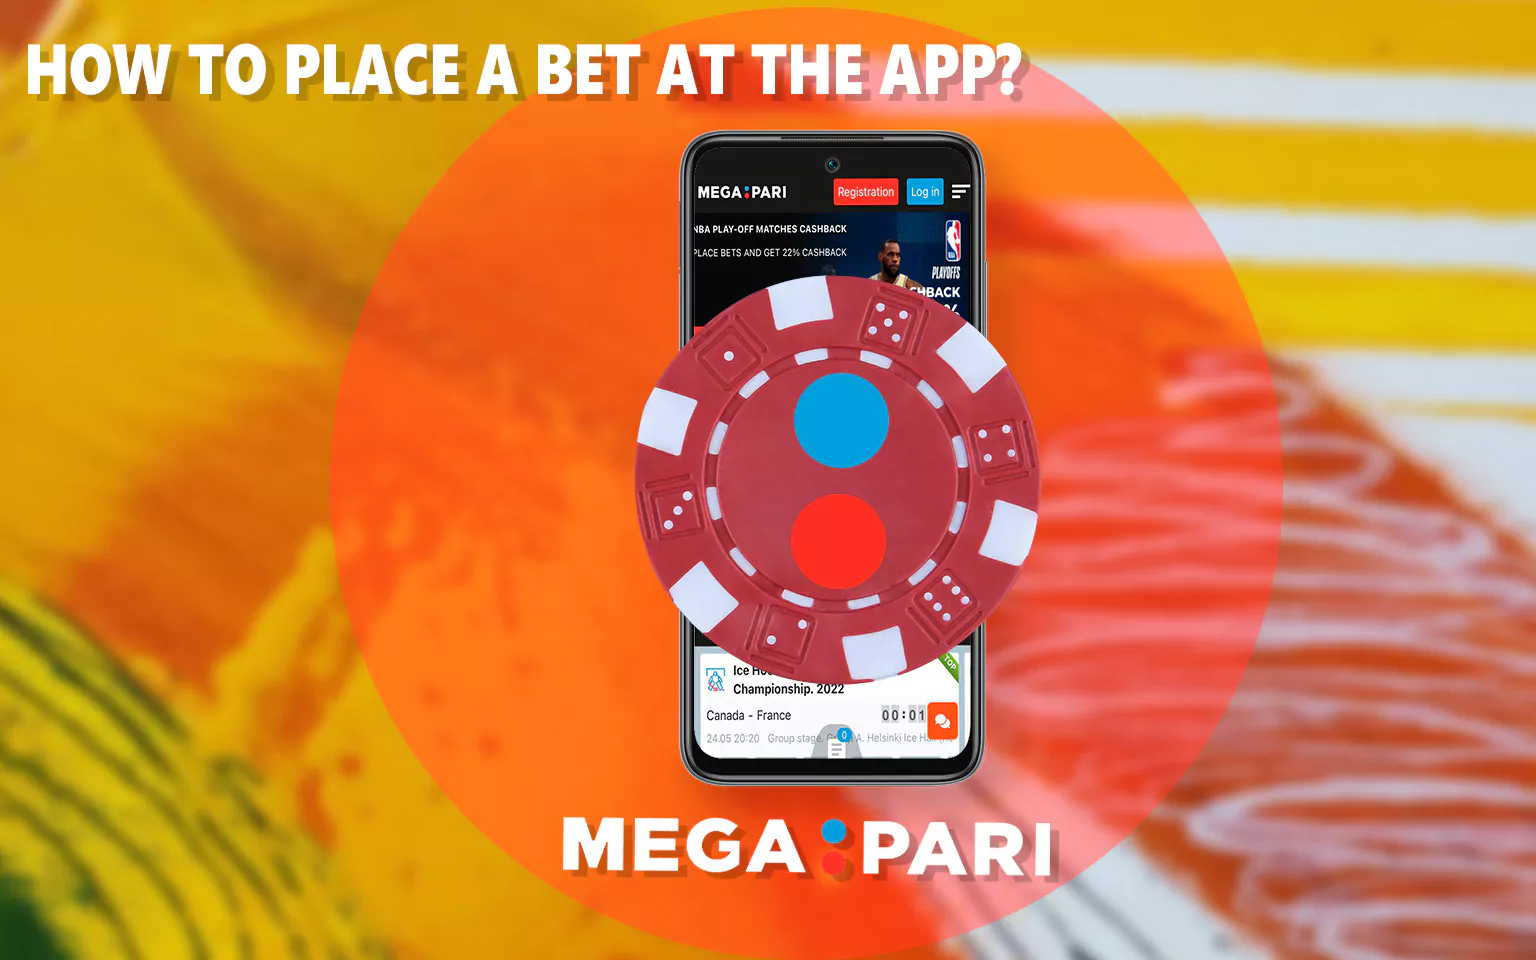 A short guide on how to place a bet in the Megapari app.